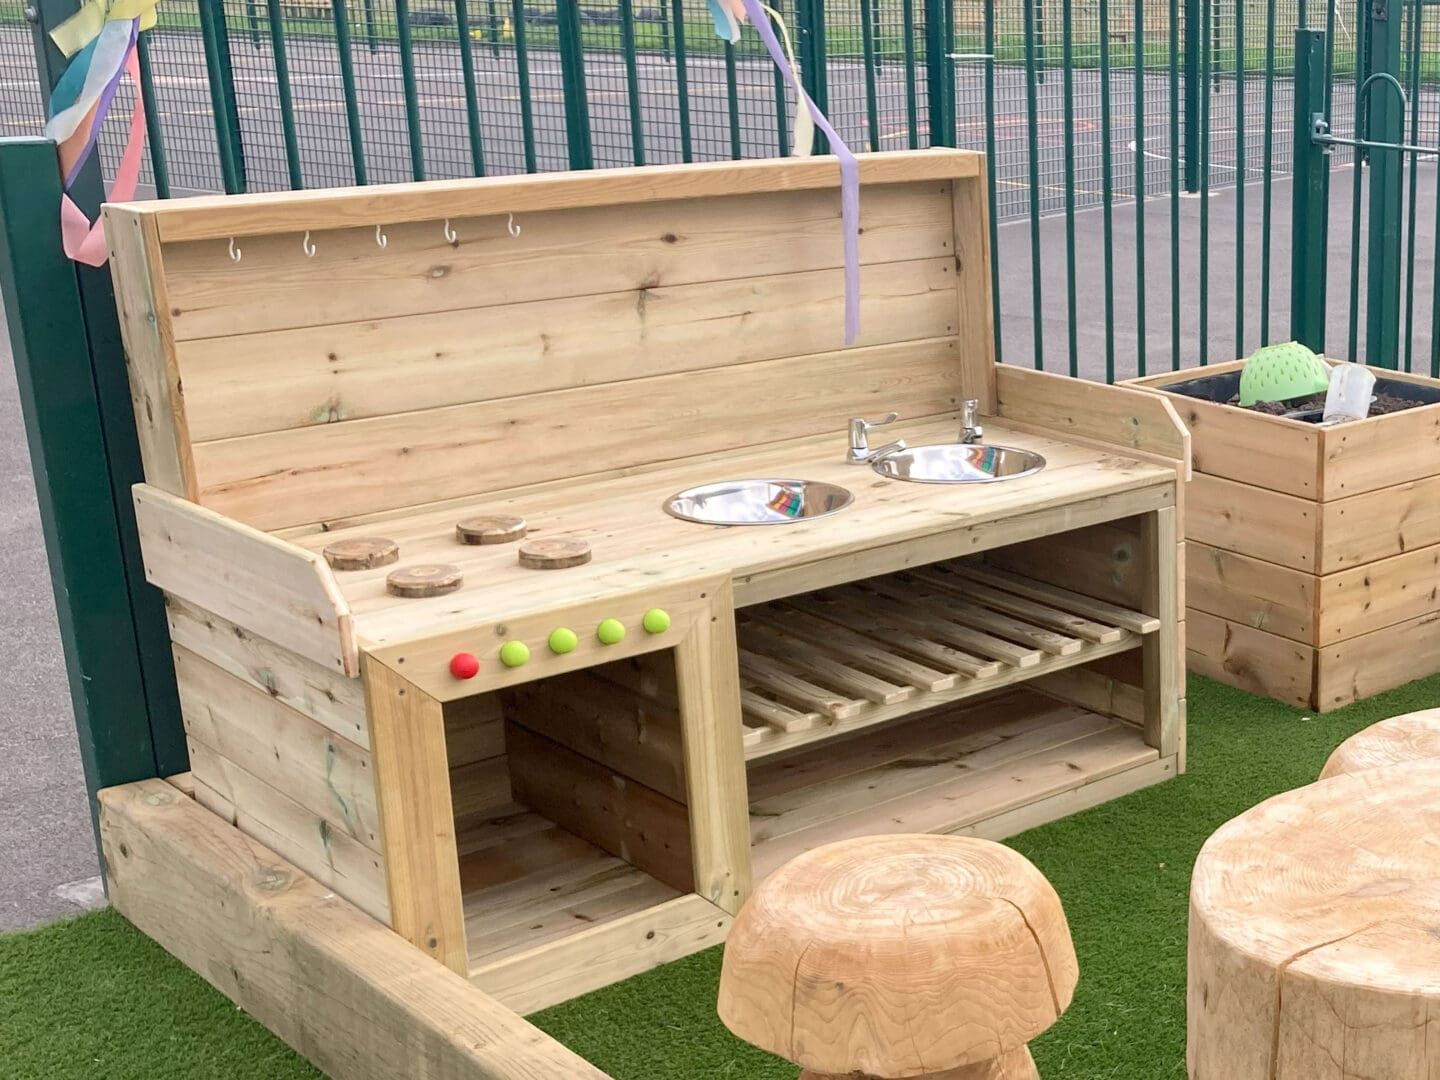 meadowside-primary-messy-play-area-copy